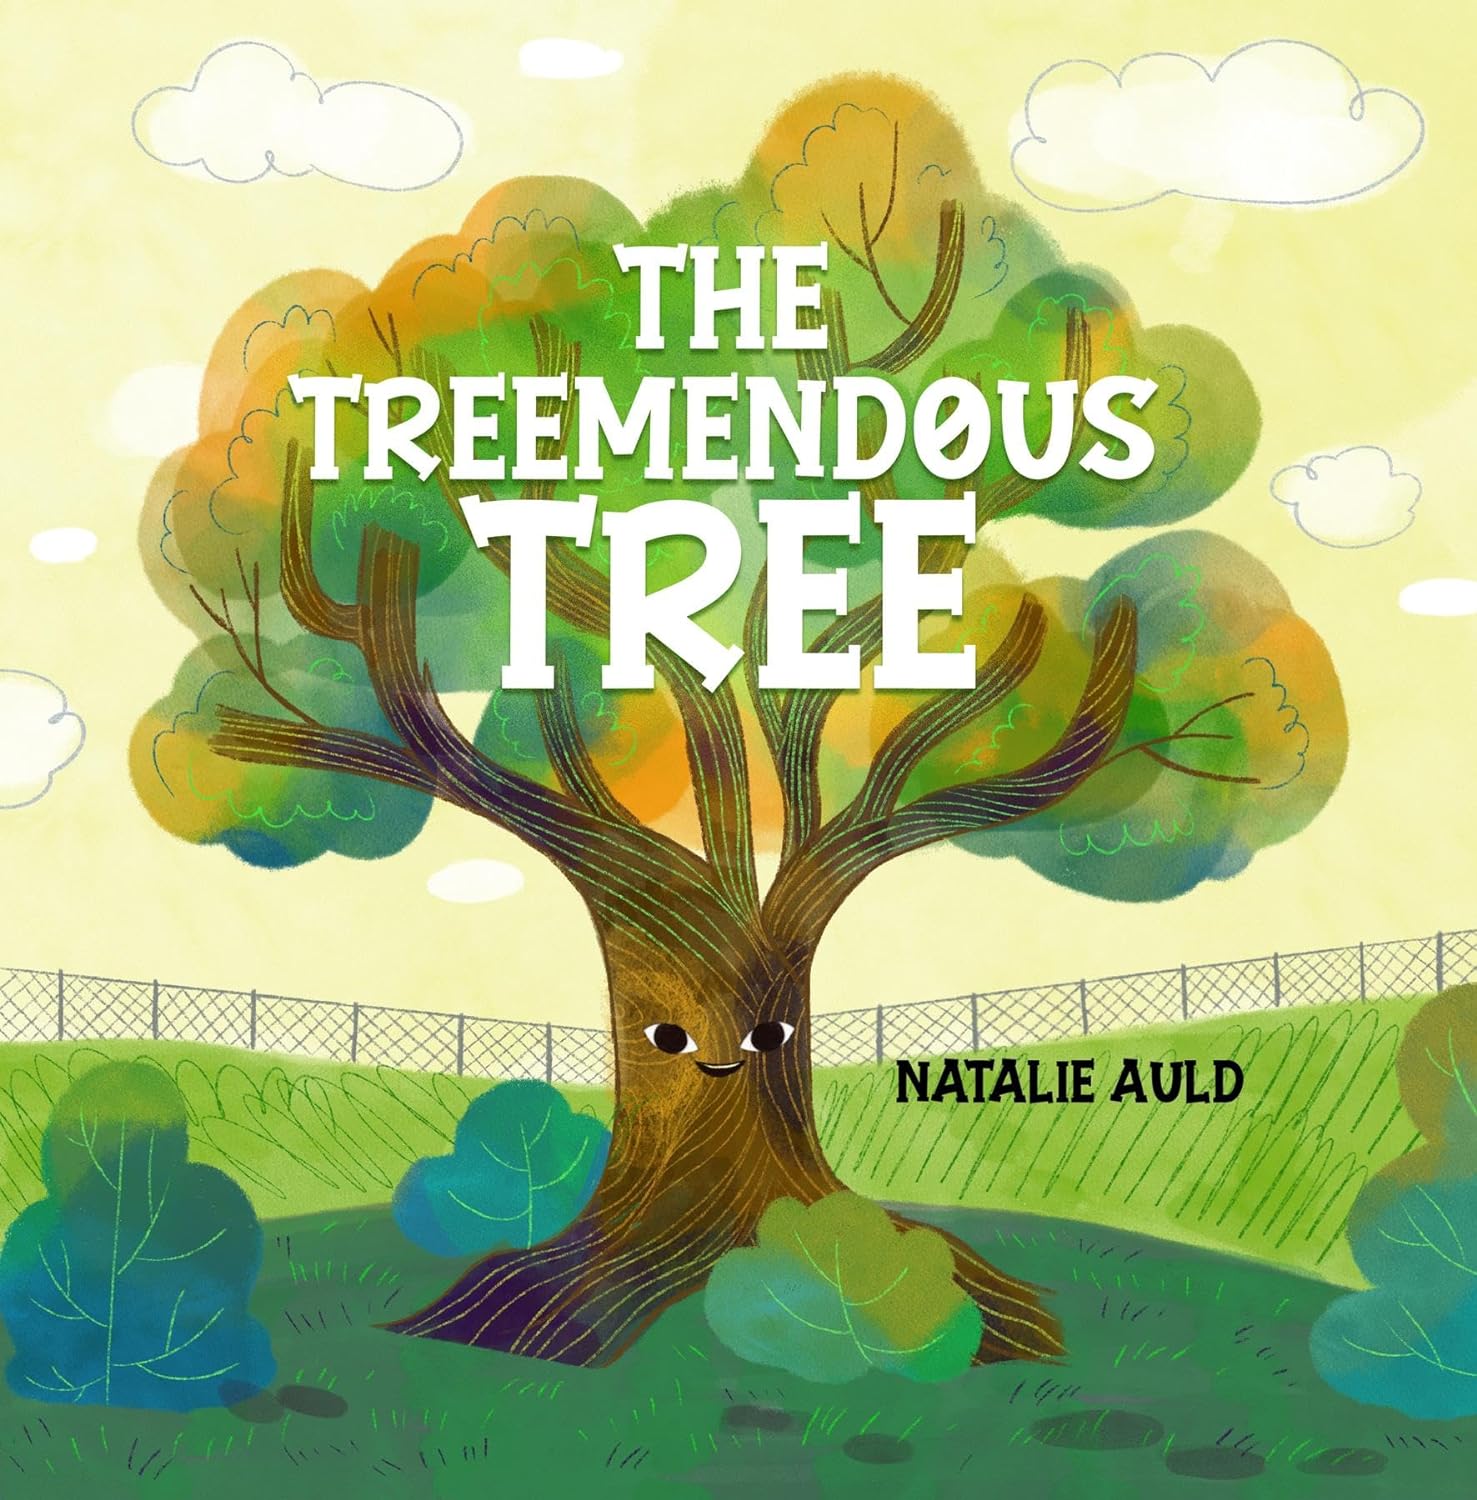 Discover the Magic of Friendship and Nature in 'The Treemendous Tree' by Natalie Auld